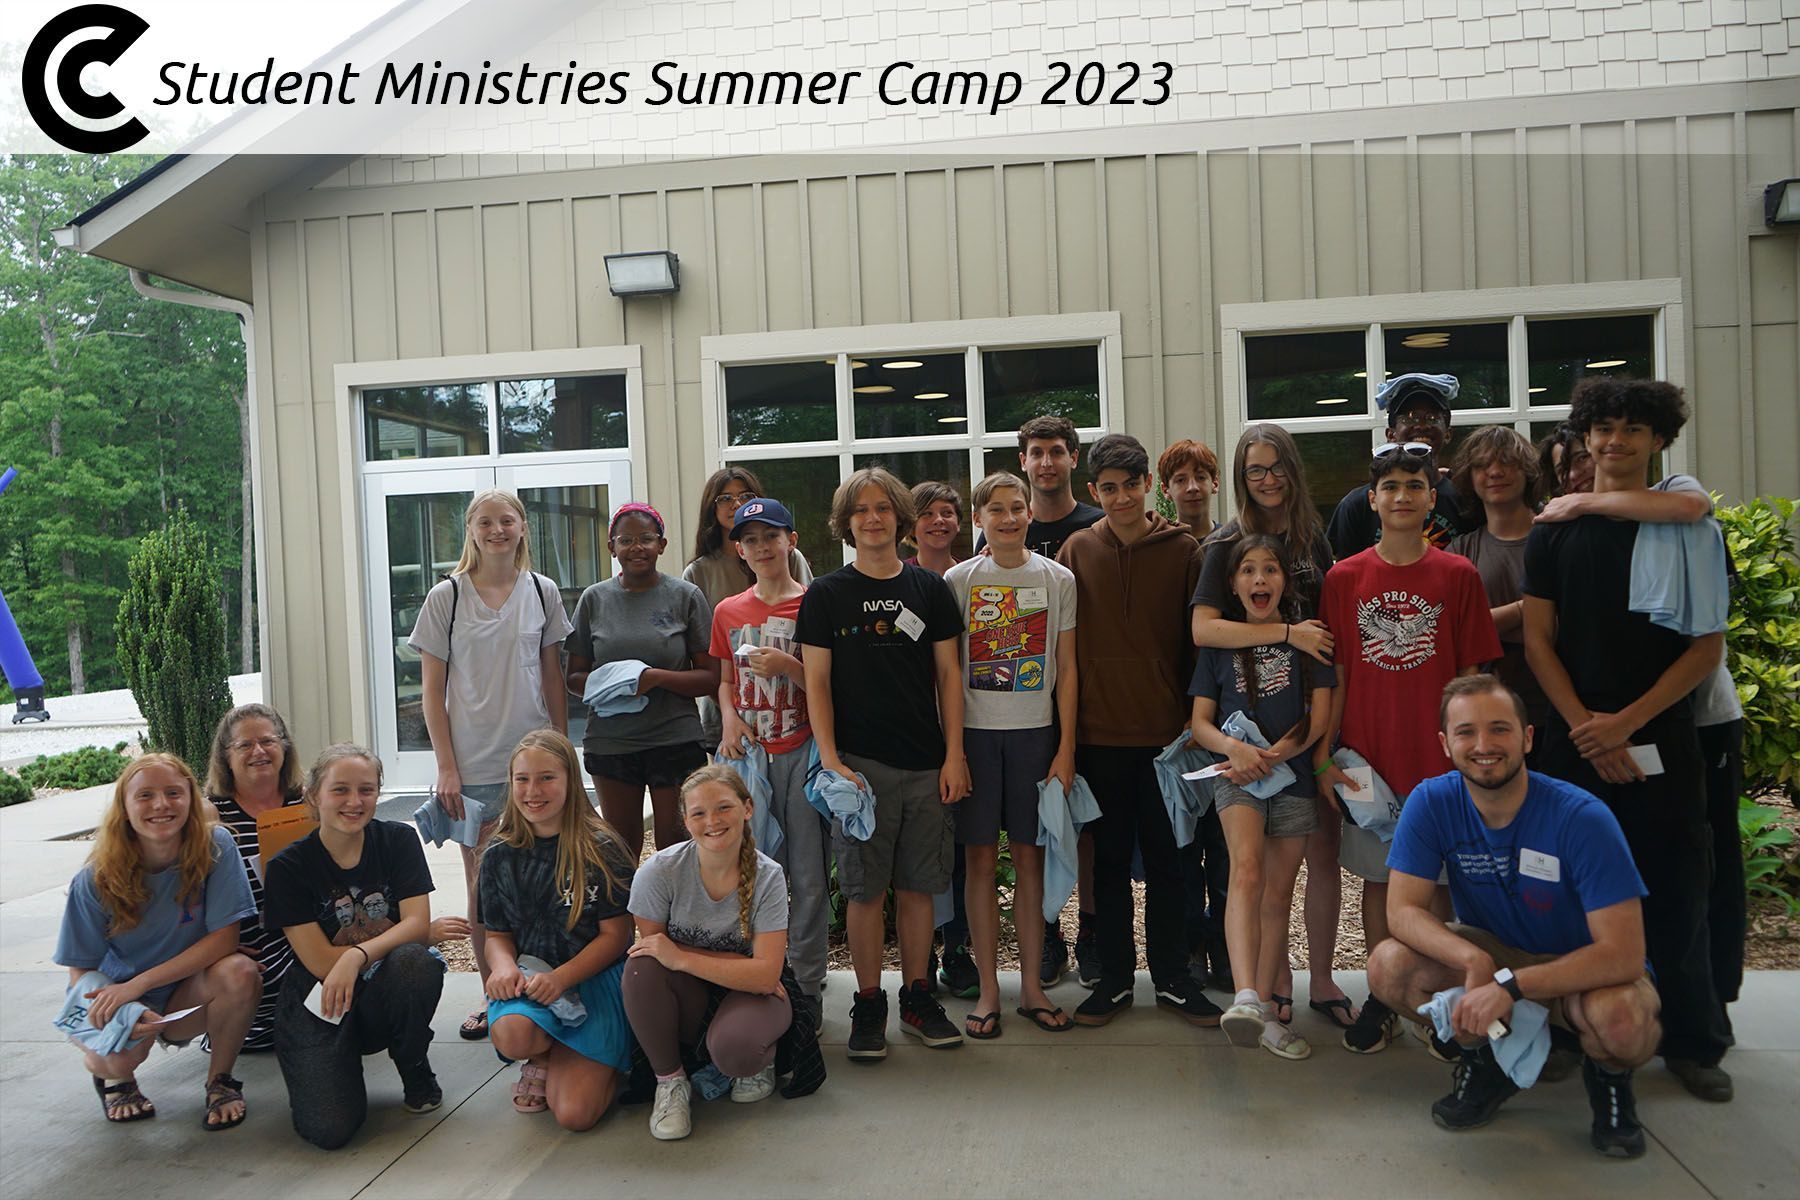 Student Ministries Summer Camp 2023